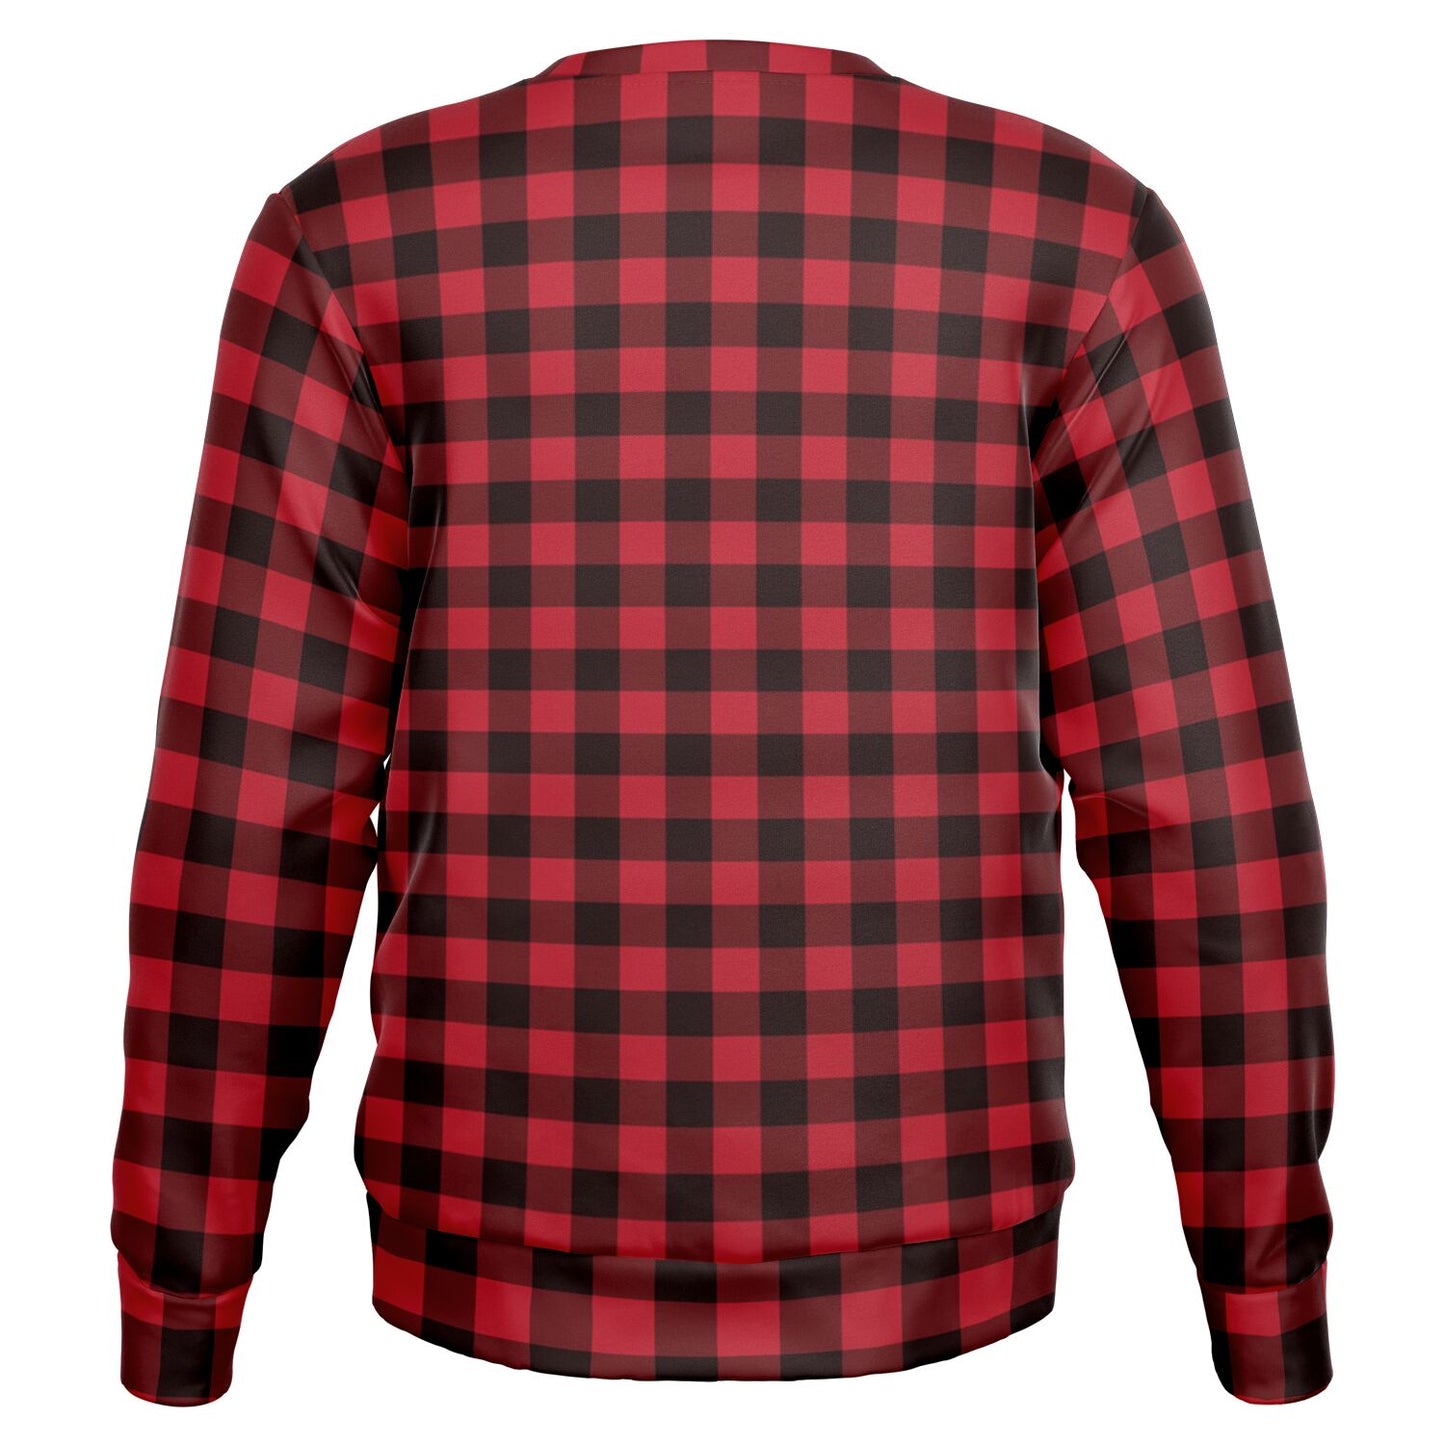 Red Buffalo Plaid Sweatshirt, Christmas Holiday Sweater Black and Red Check Checkered Gingham Cotton Crewneck Winter Top Plus Size Starcove Fashion